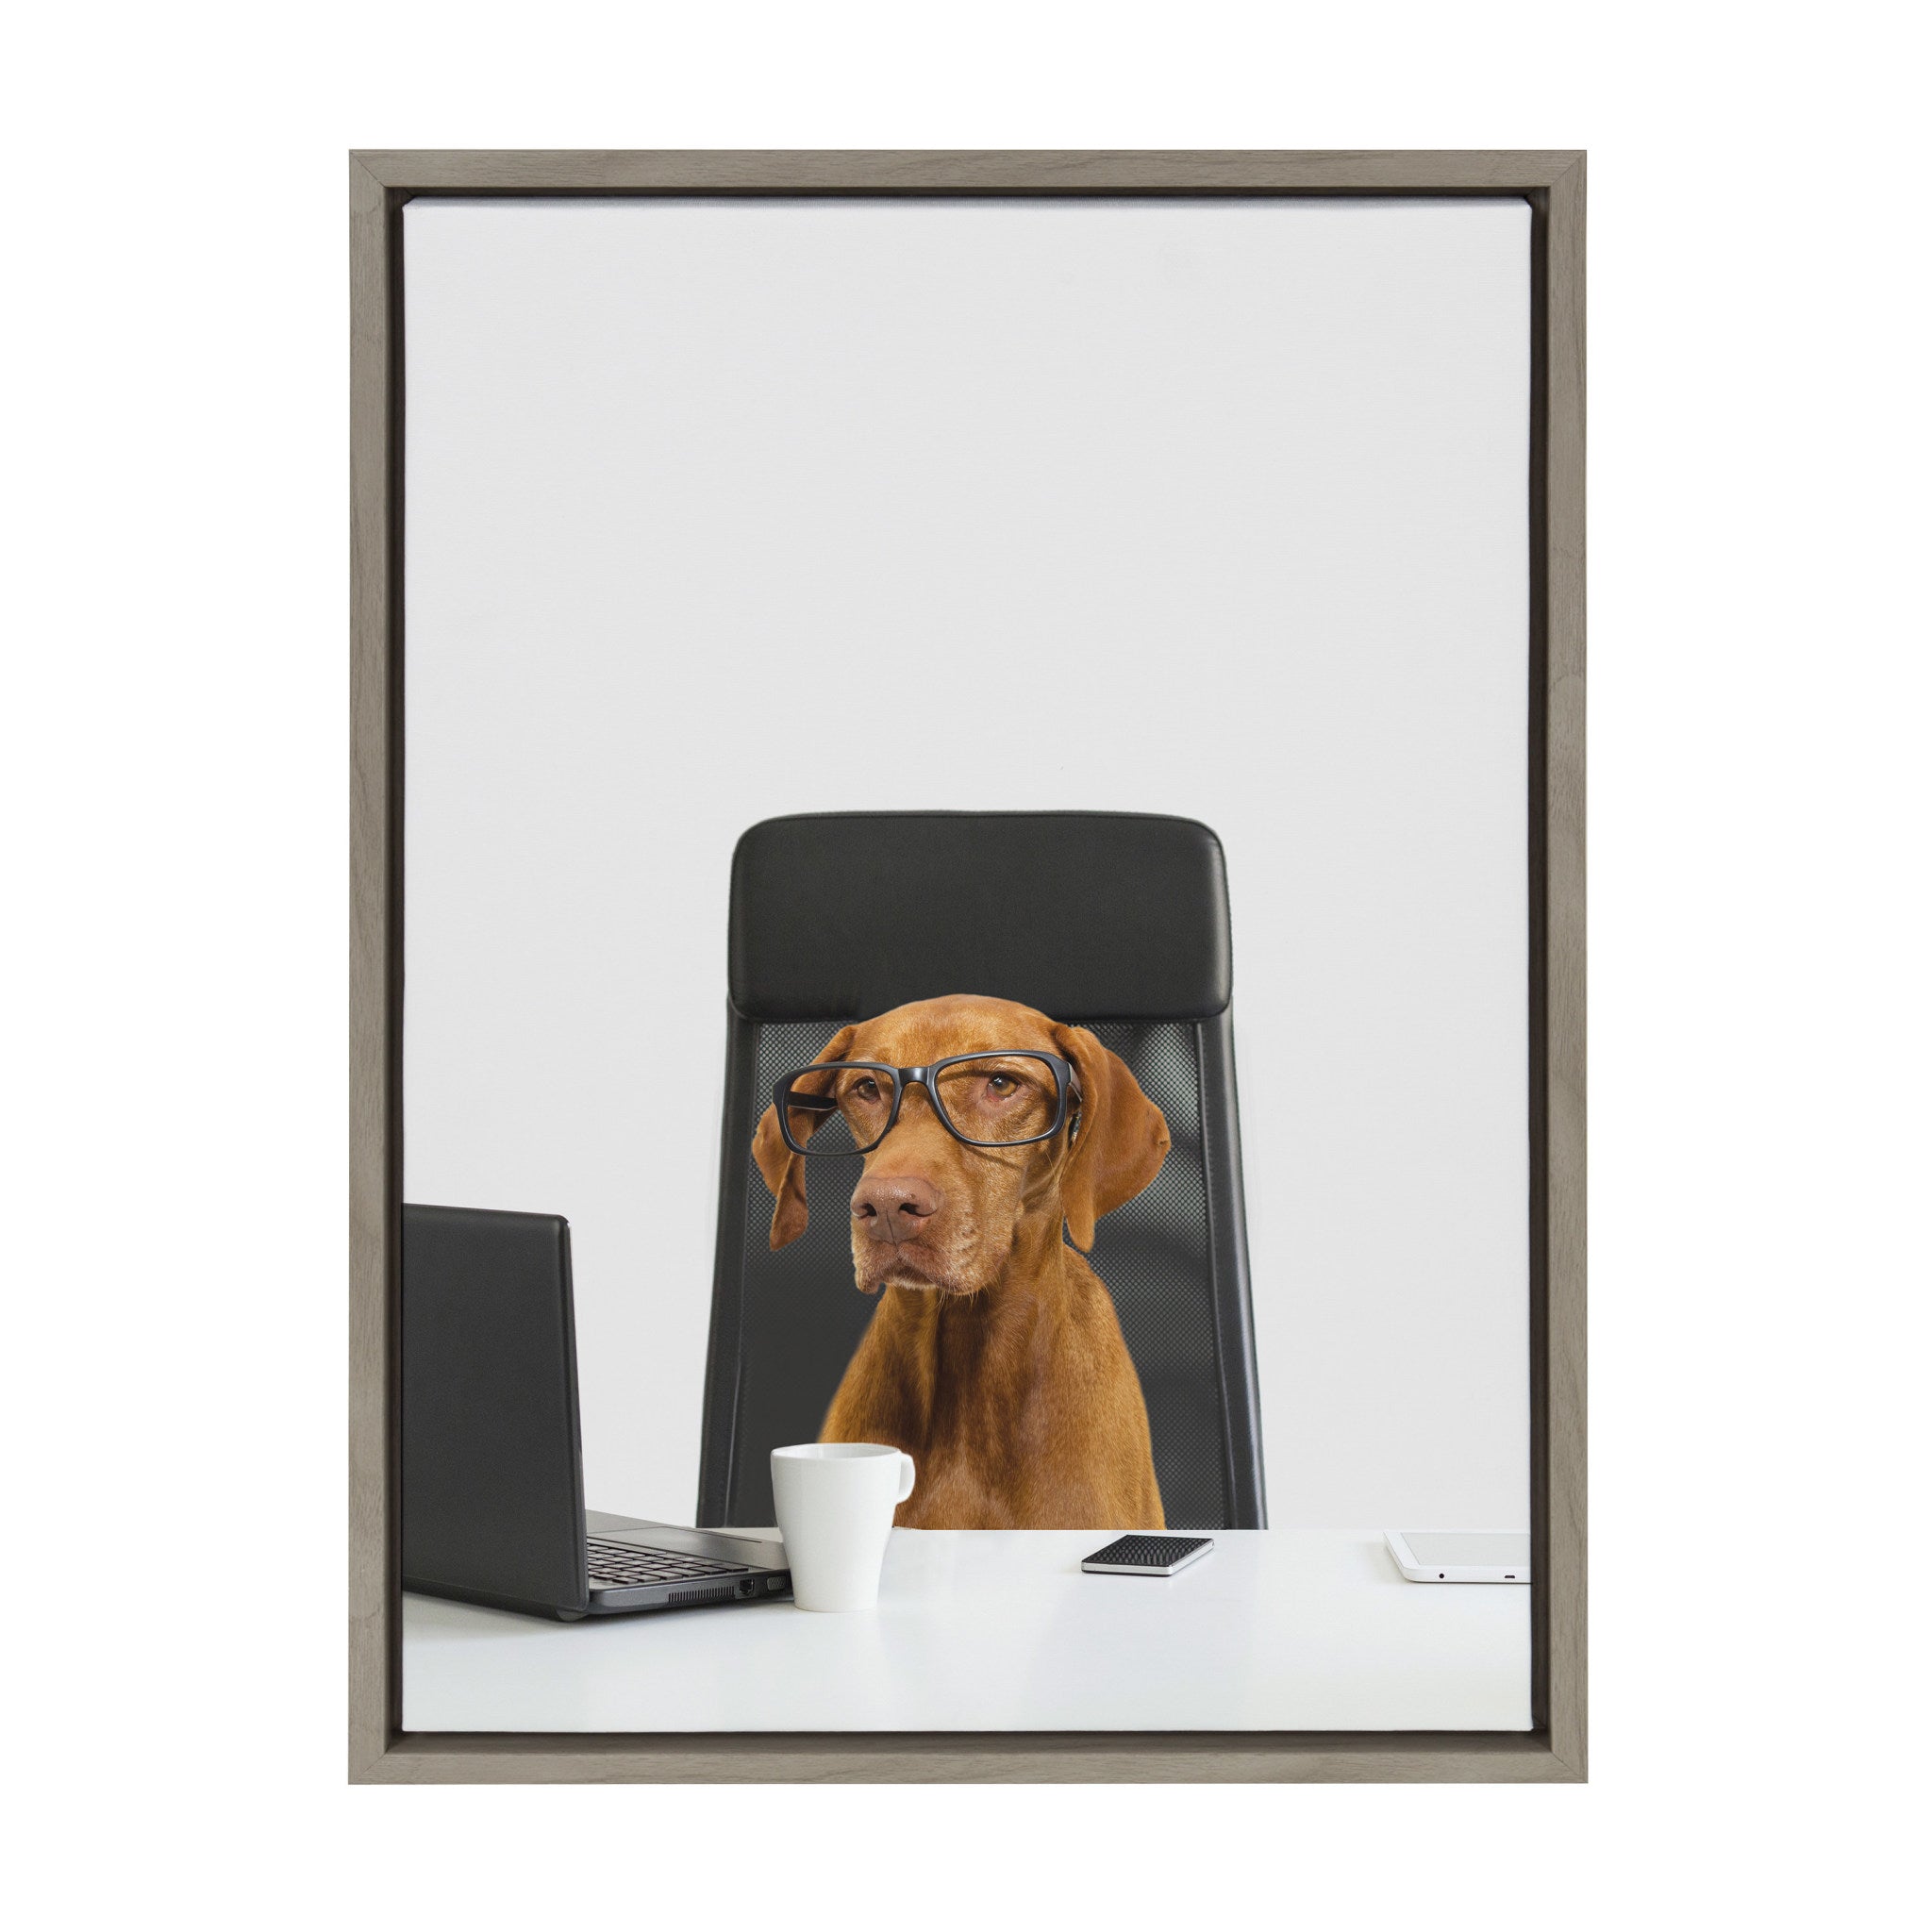 Sylvie I’m Diane. VP of Engineering Framed Canvas by The Creative Bunch Studio